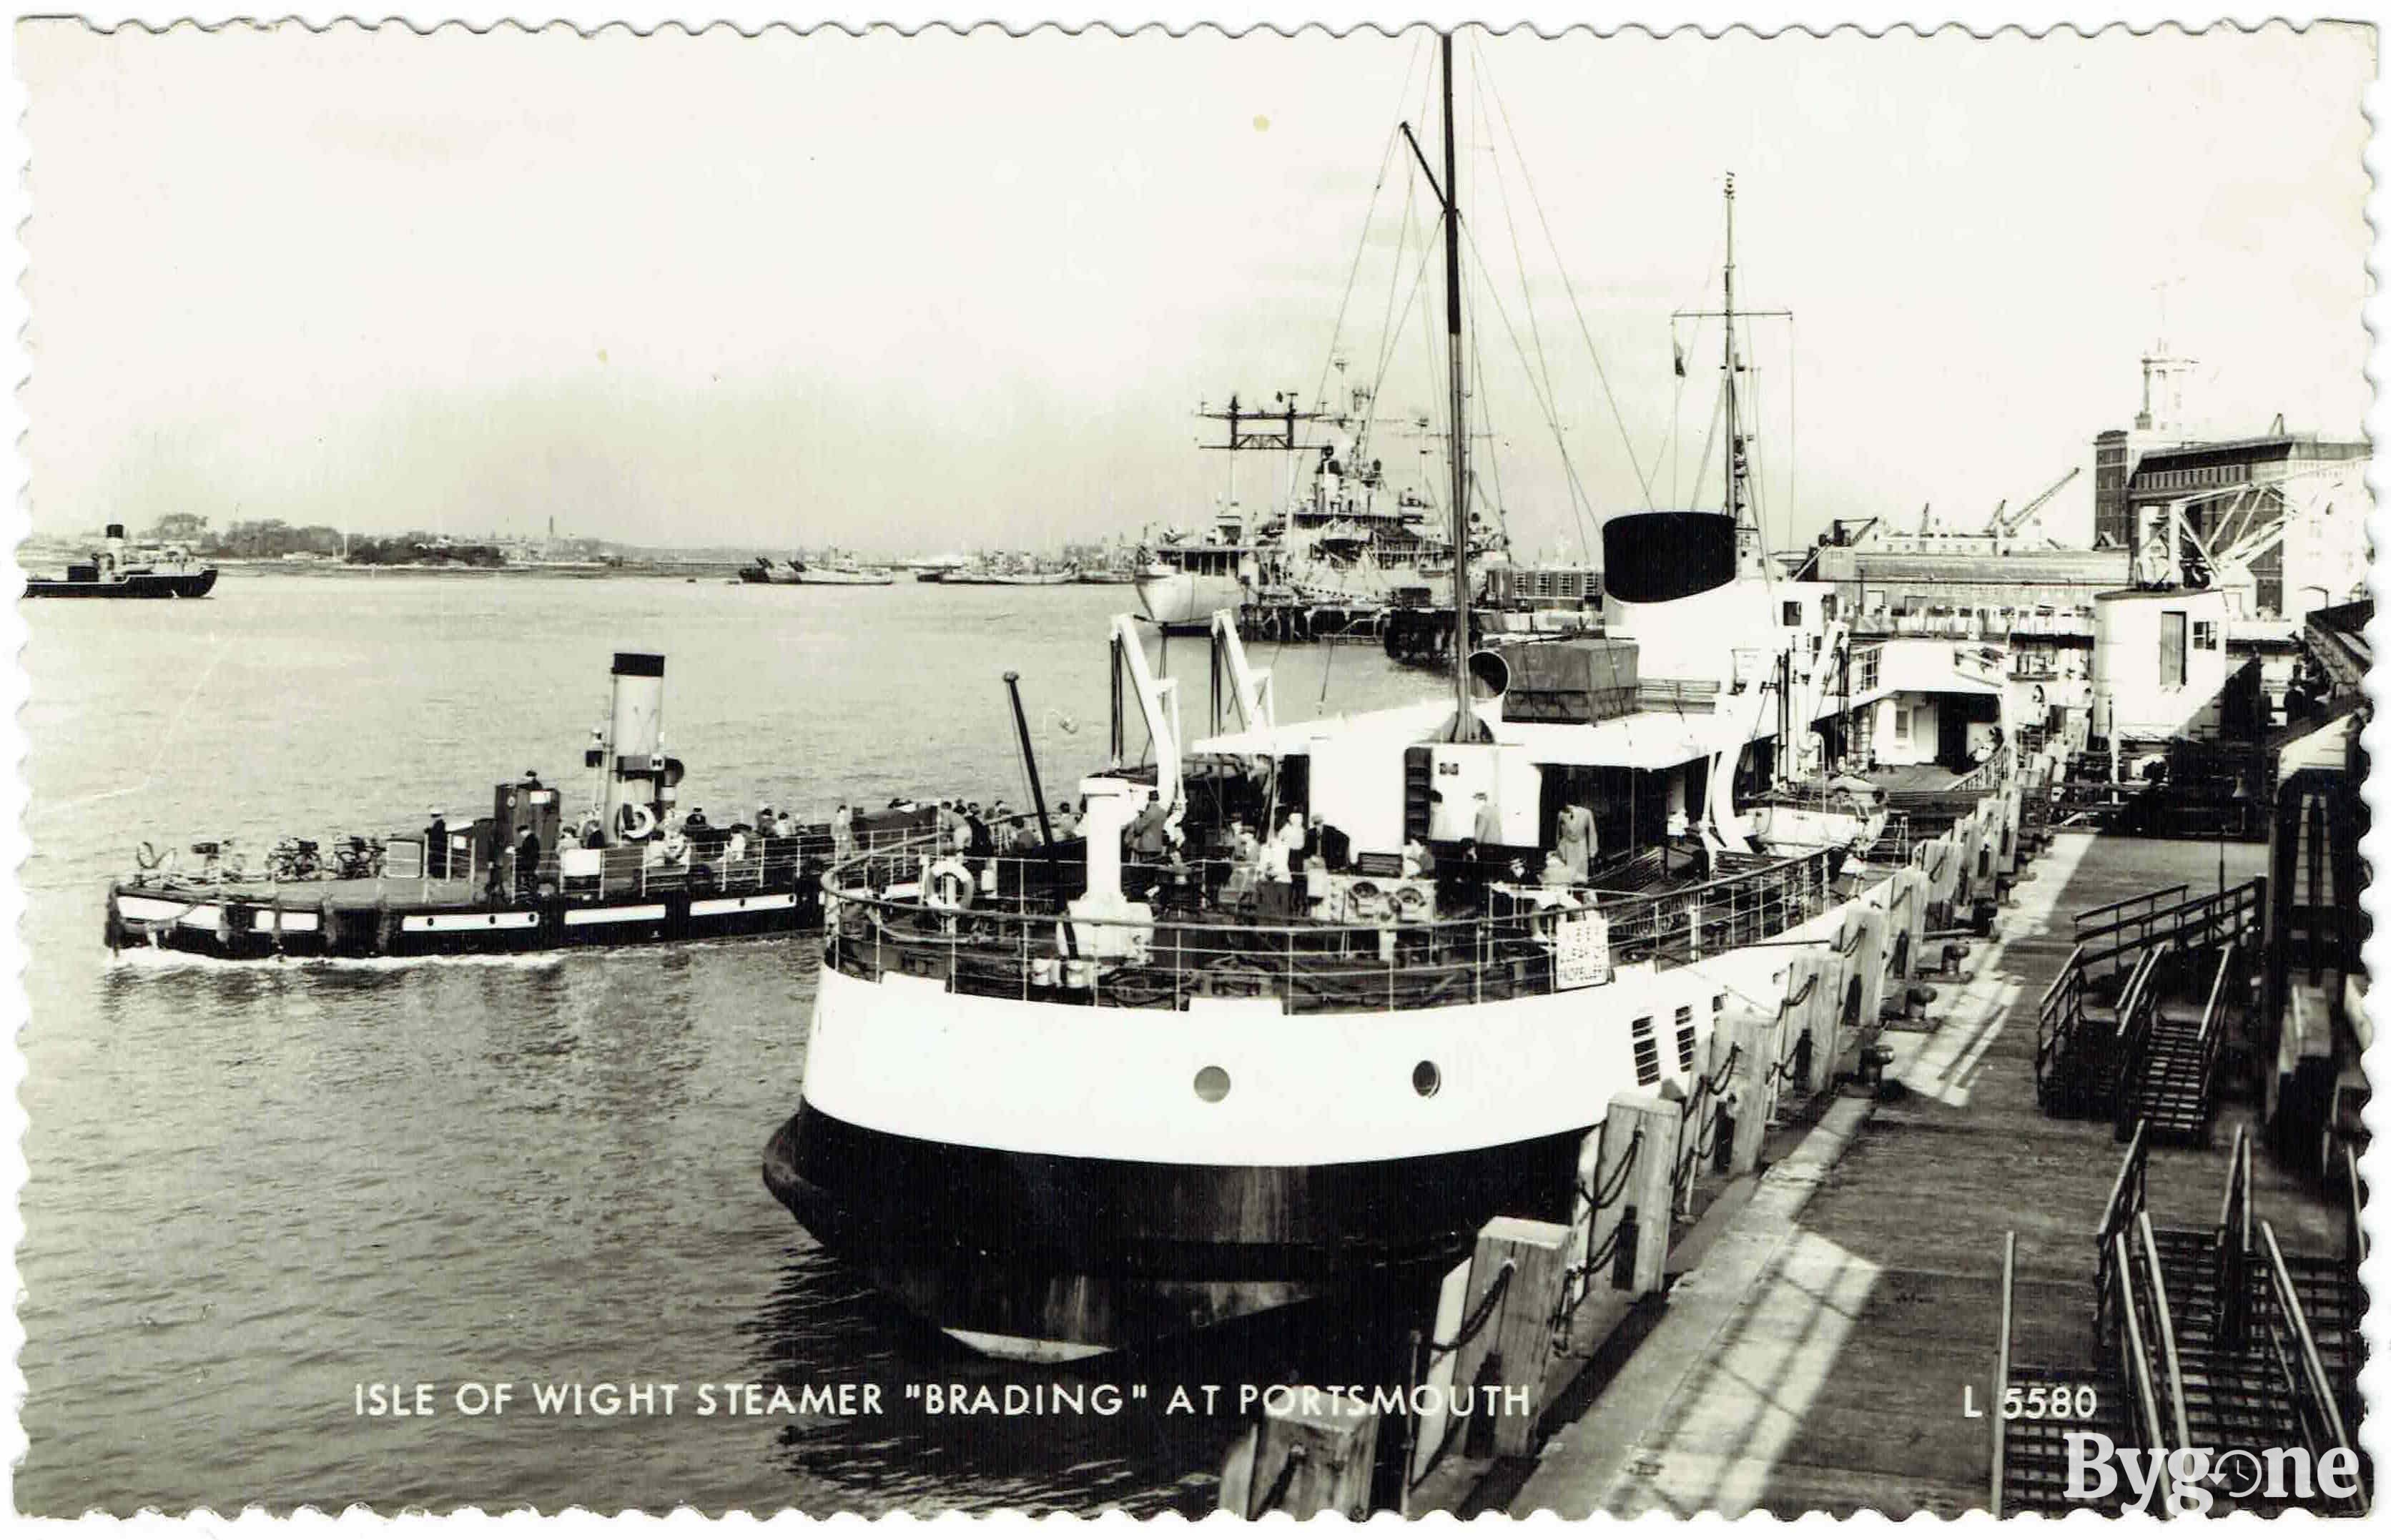 Isle of Wight Steamer "Brading" at Portsmouth